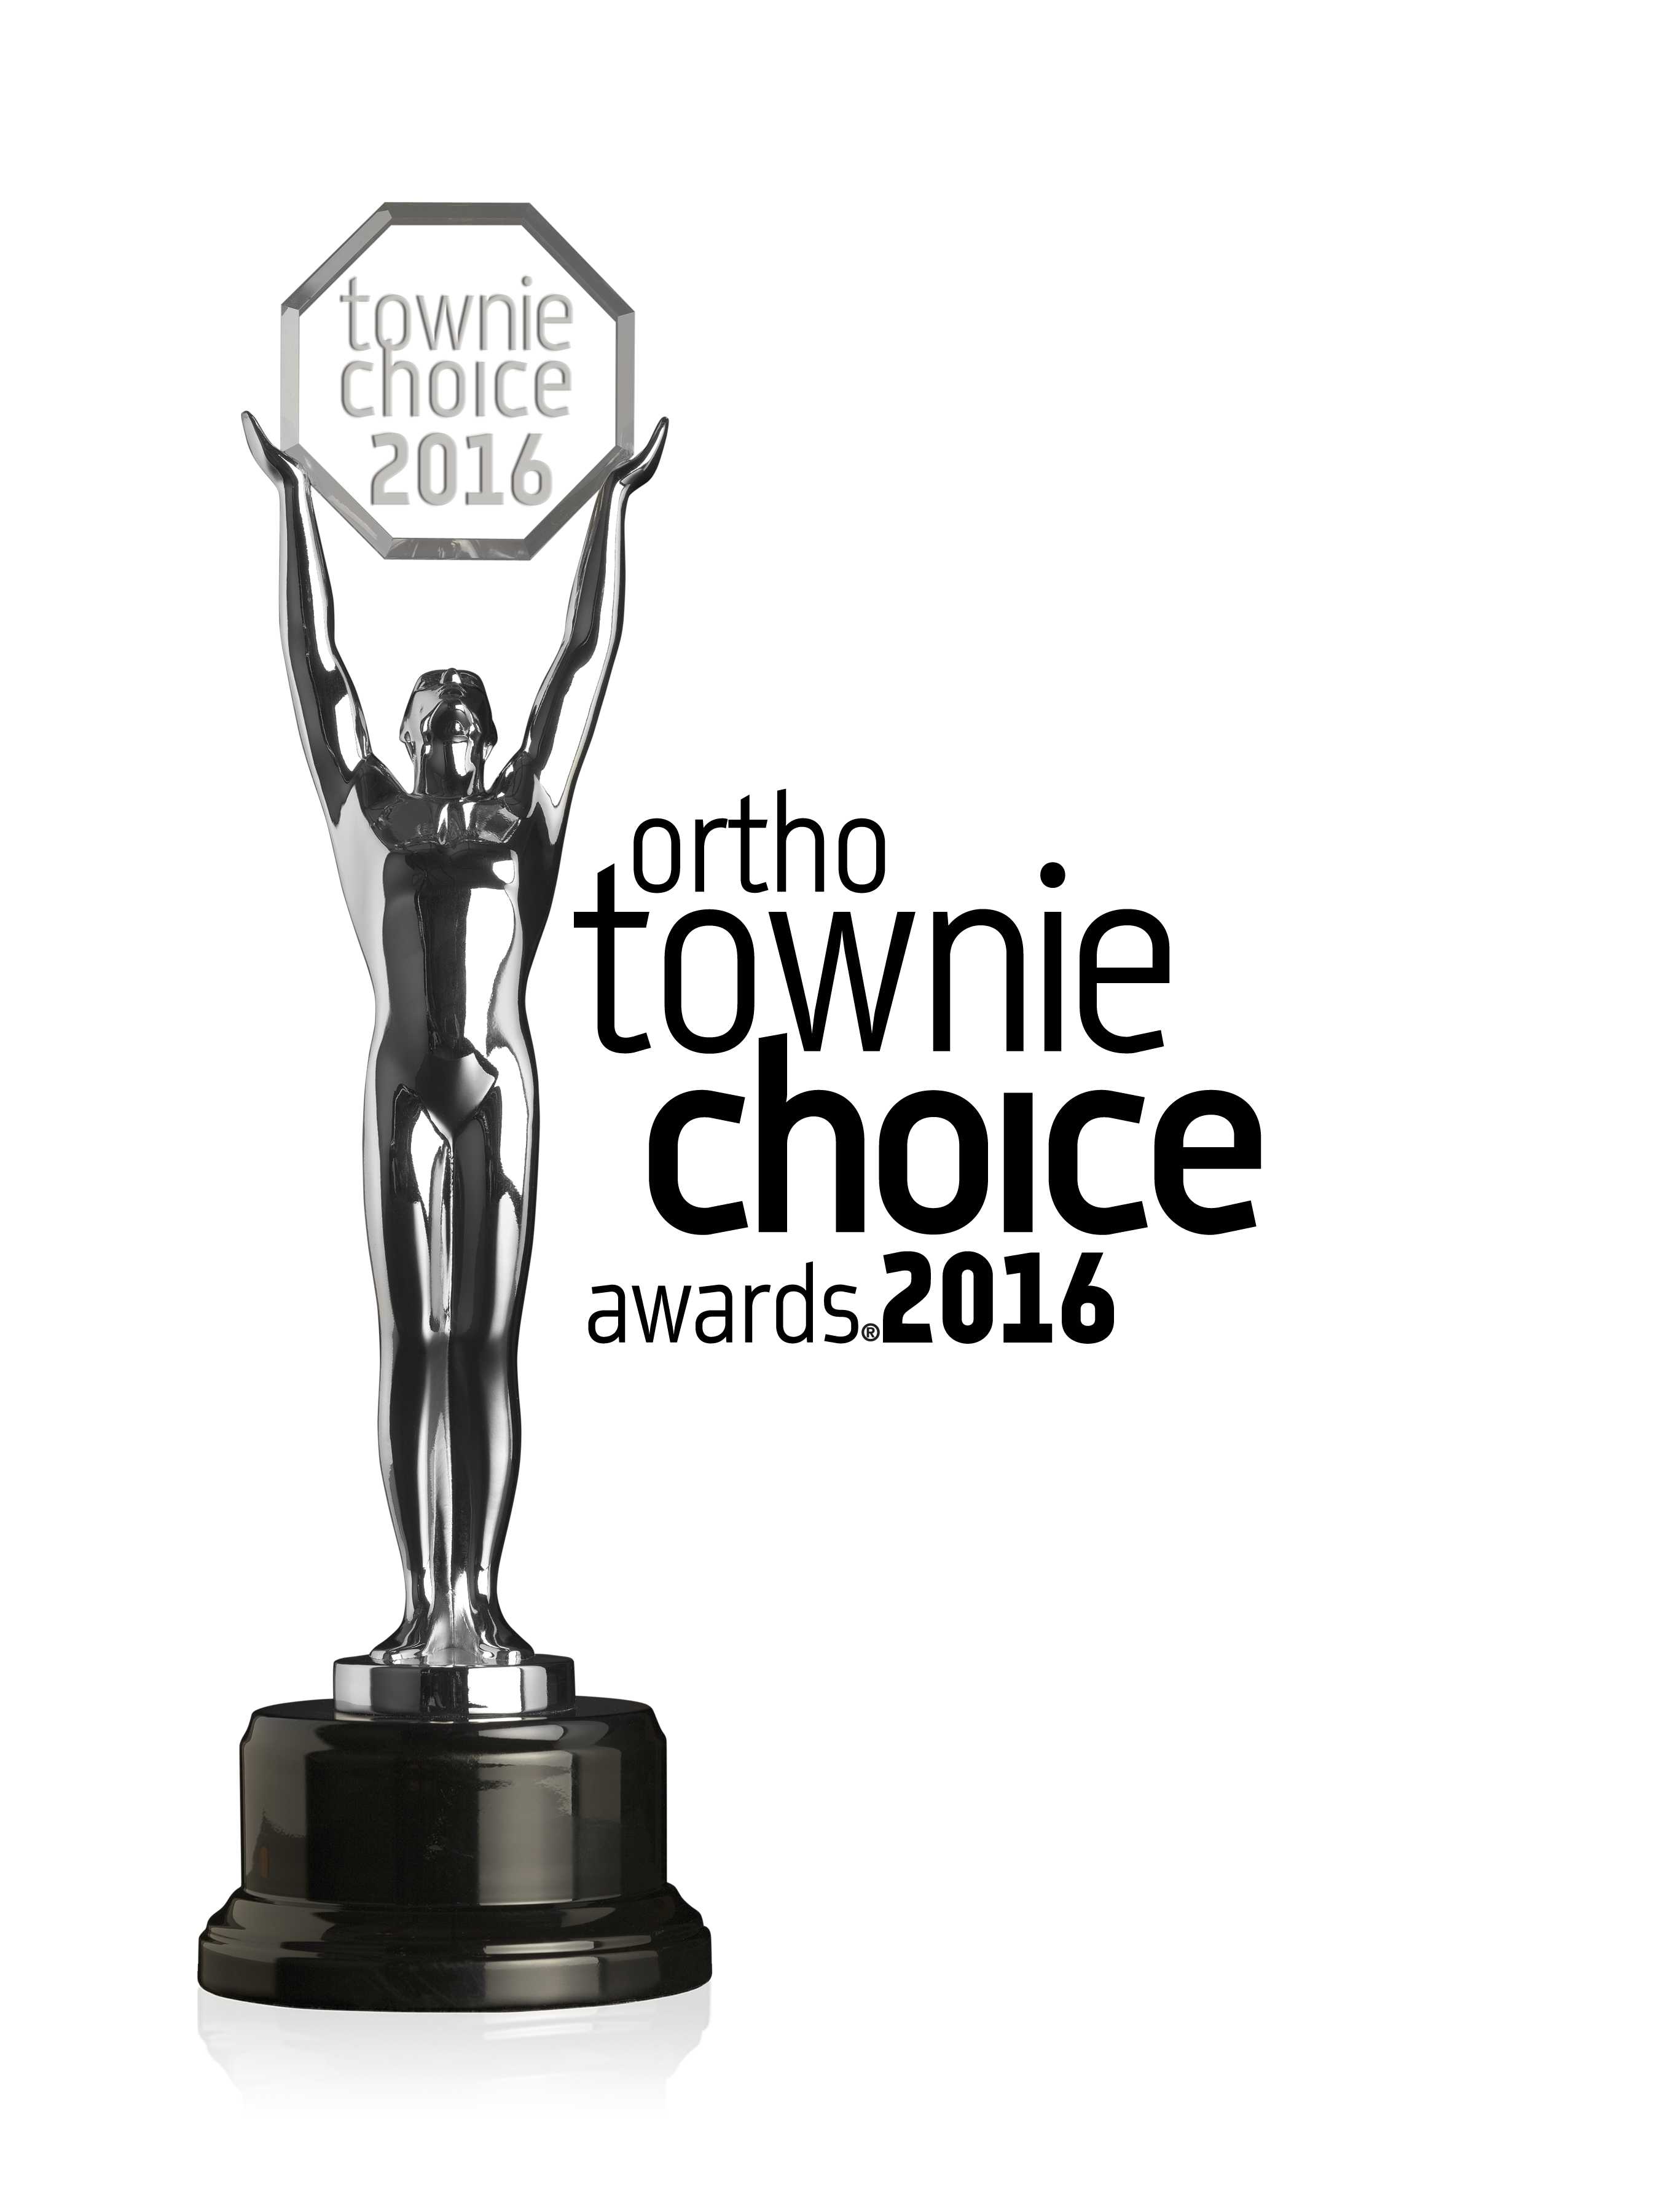 Winner of the 2013, 2014, 2015, 2016 Ortho Townie Choice® Awards